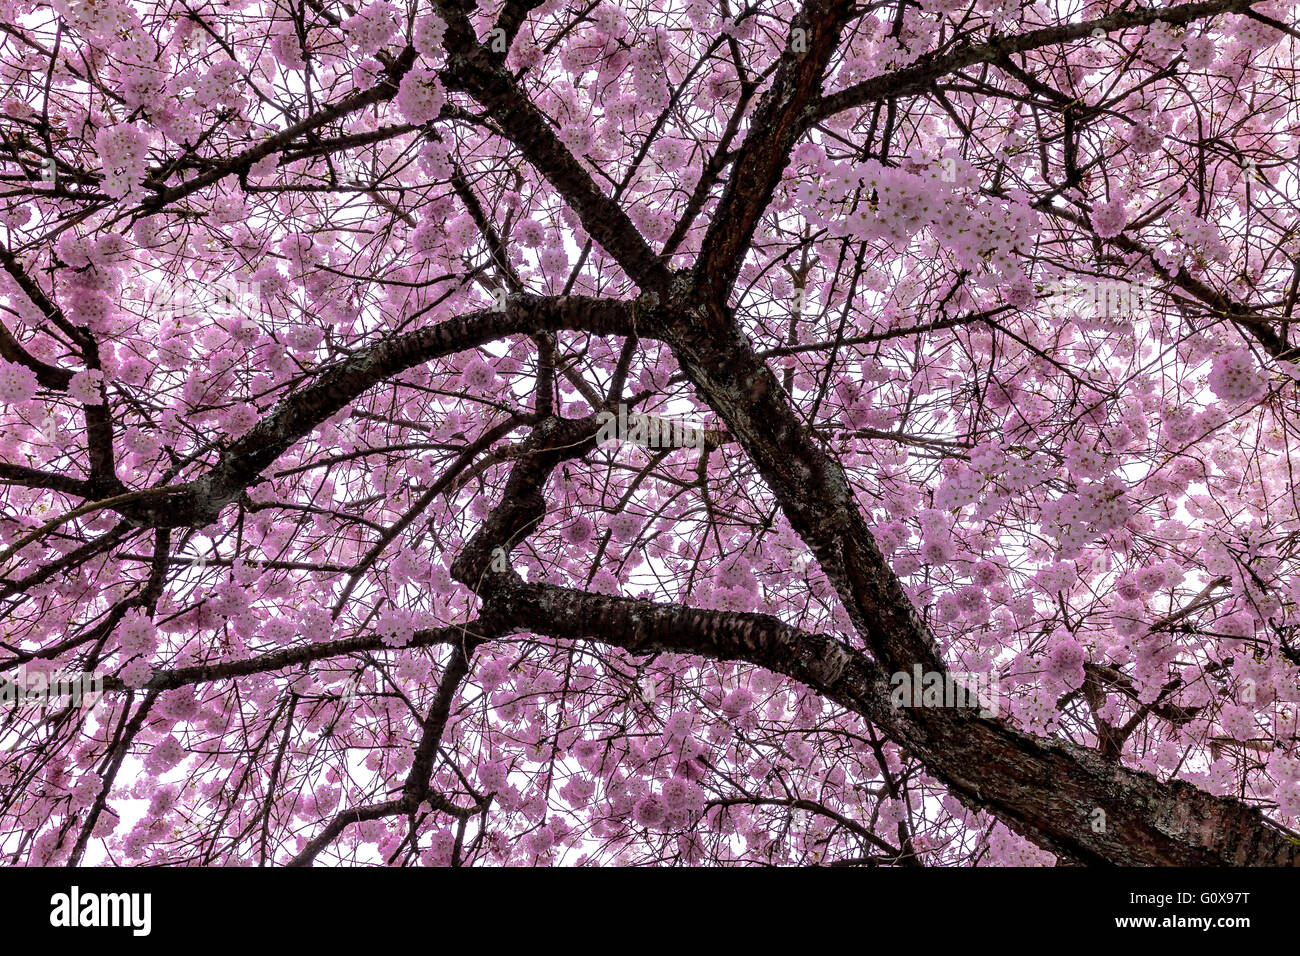 A cherry blossom tree in full bloom during the first week of spring stock photo